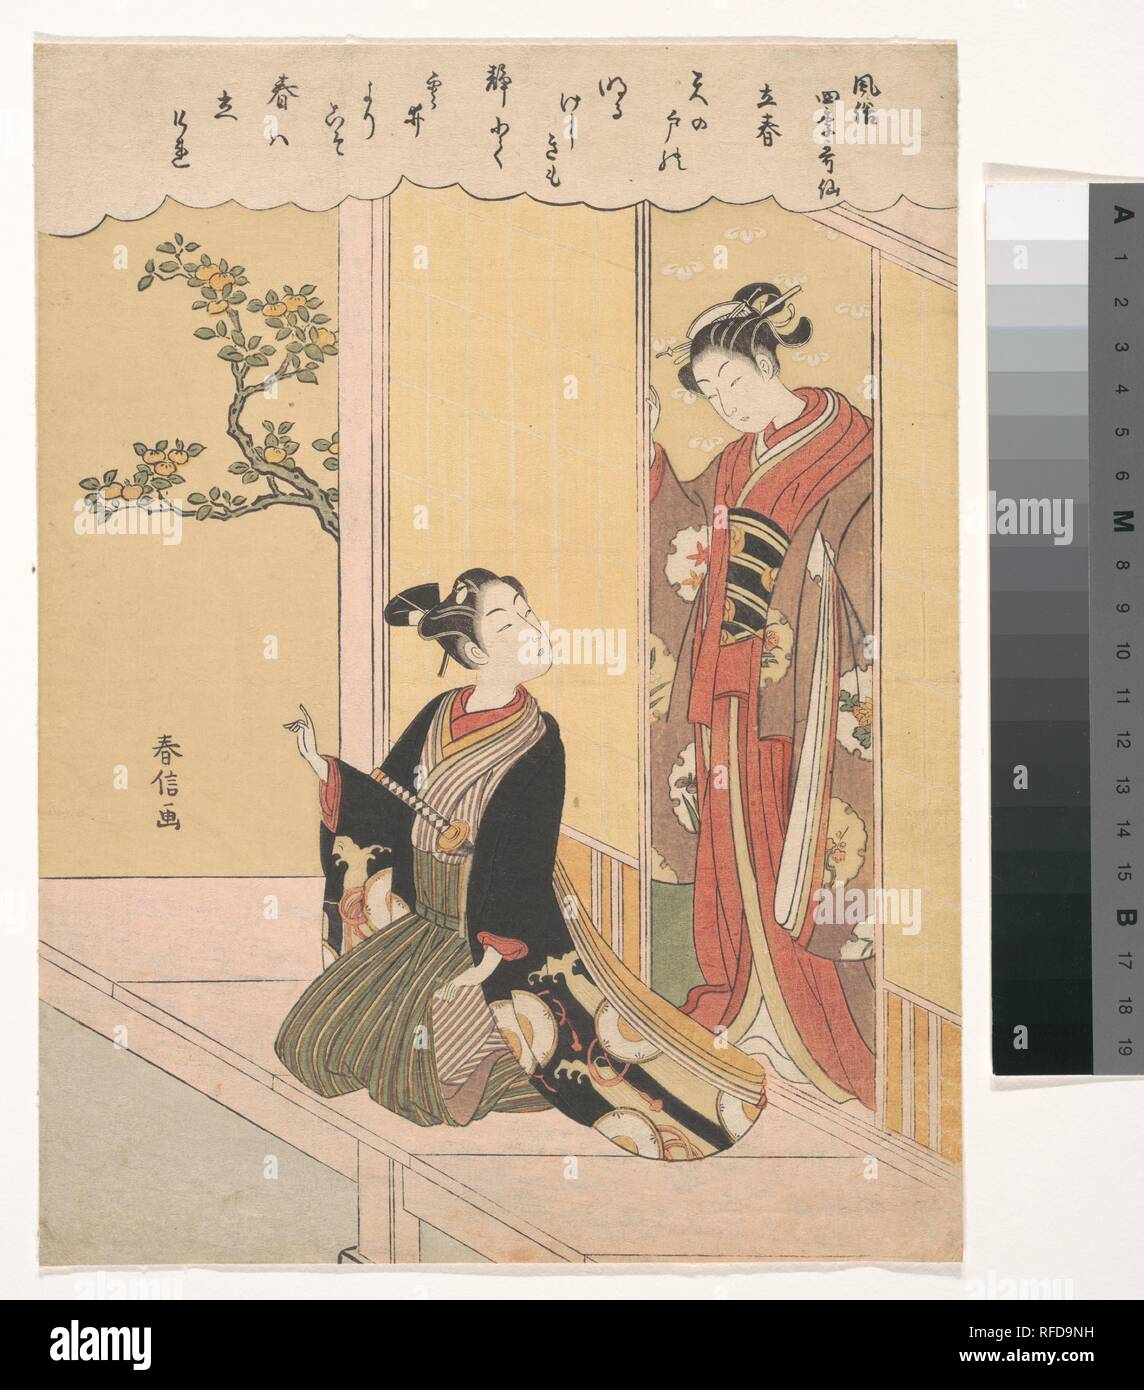 The First Day of Spring (Risshun), from the series Fashionable Poetic Immortals of the Four Seasons (Fuzoku shiki Kasen). Artist: Suzuki Harunobu (Japanese, 1725-1770). Culture: Japan. Dimensions: 11 x 8 1/4 in. (27.9 x 21 cm). Date: ca. 1768.  A young man with a sword tucked into his sash looks up at a young woman in the doorway as he gestures toward a bitter-orange (daidai) tree in the garden. The artist puns on a classical poem by Fujiwara no Shunzei (1114-1204) that refers to opening the gates of the heavens (ama no to) by showing a young woman opening rain shutters (amado). The poem reads Stock Photo